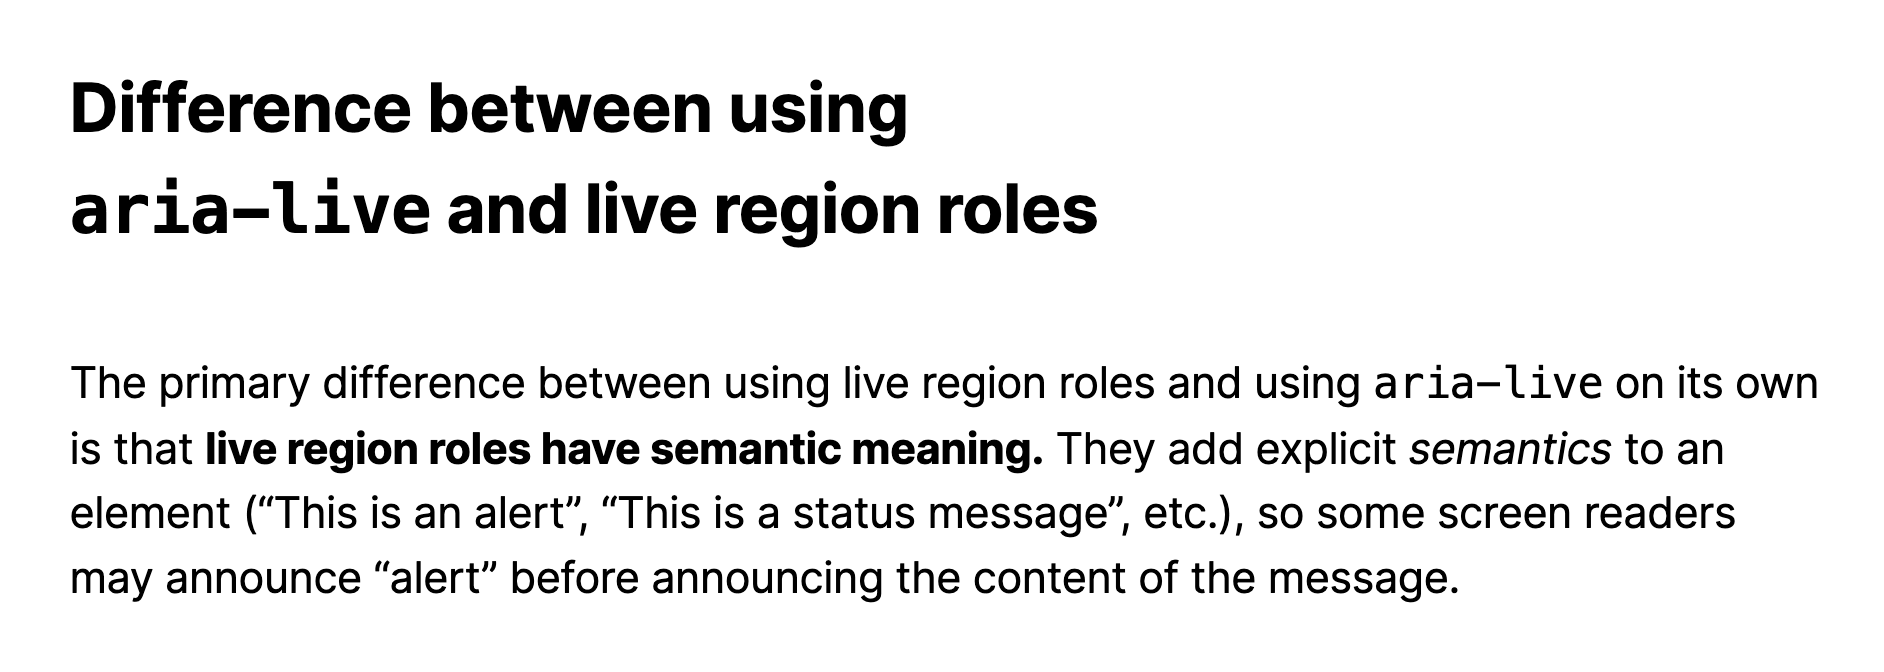 Difference between using aria-live and live region roles.  The primary difference between using live region roles and using aria-live on its own is that live region roles have semantic meaning. They add explicit semantics to an element ("This is an alert", "This is a status message", etc.), so some screen readers may announce “alert” before announcing the content of the message.